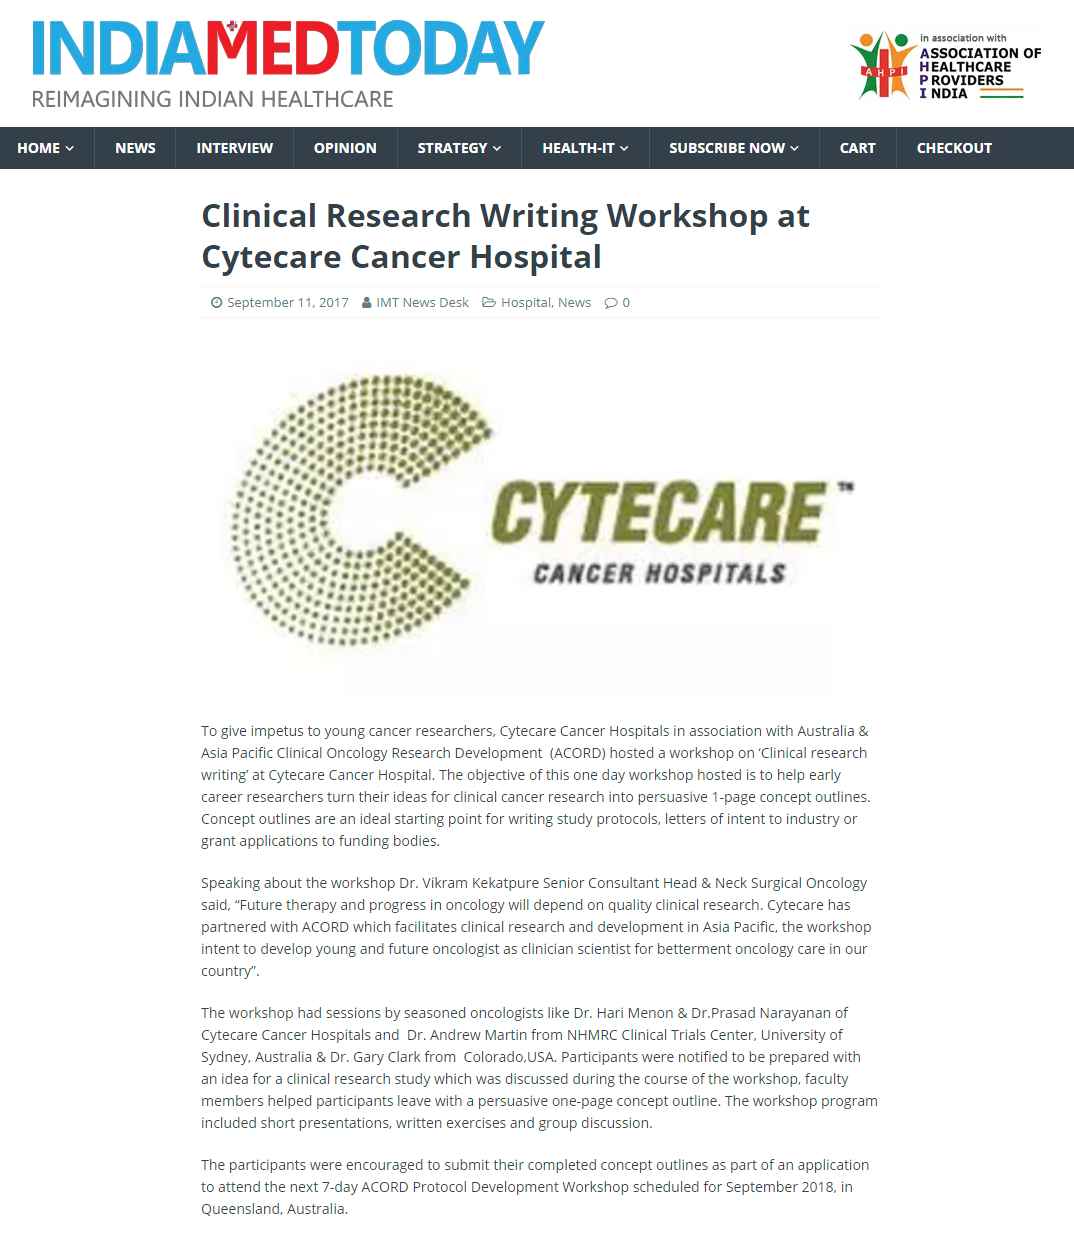 Clinical Research Writing Workshop at Cytecare